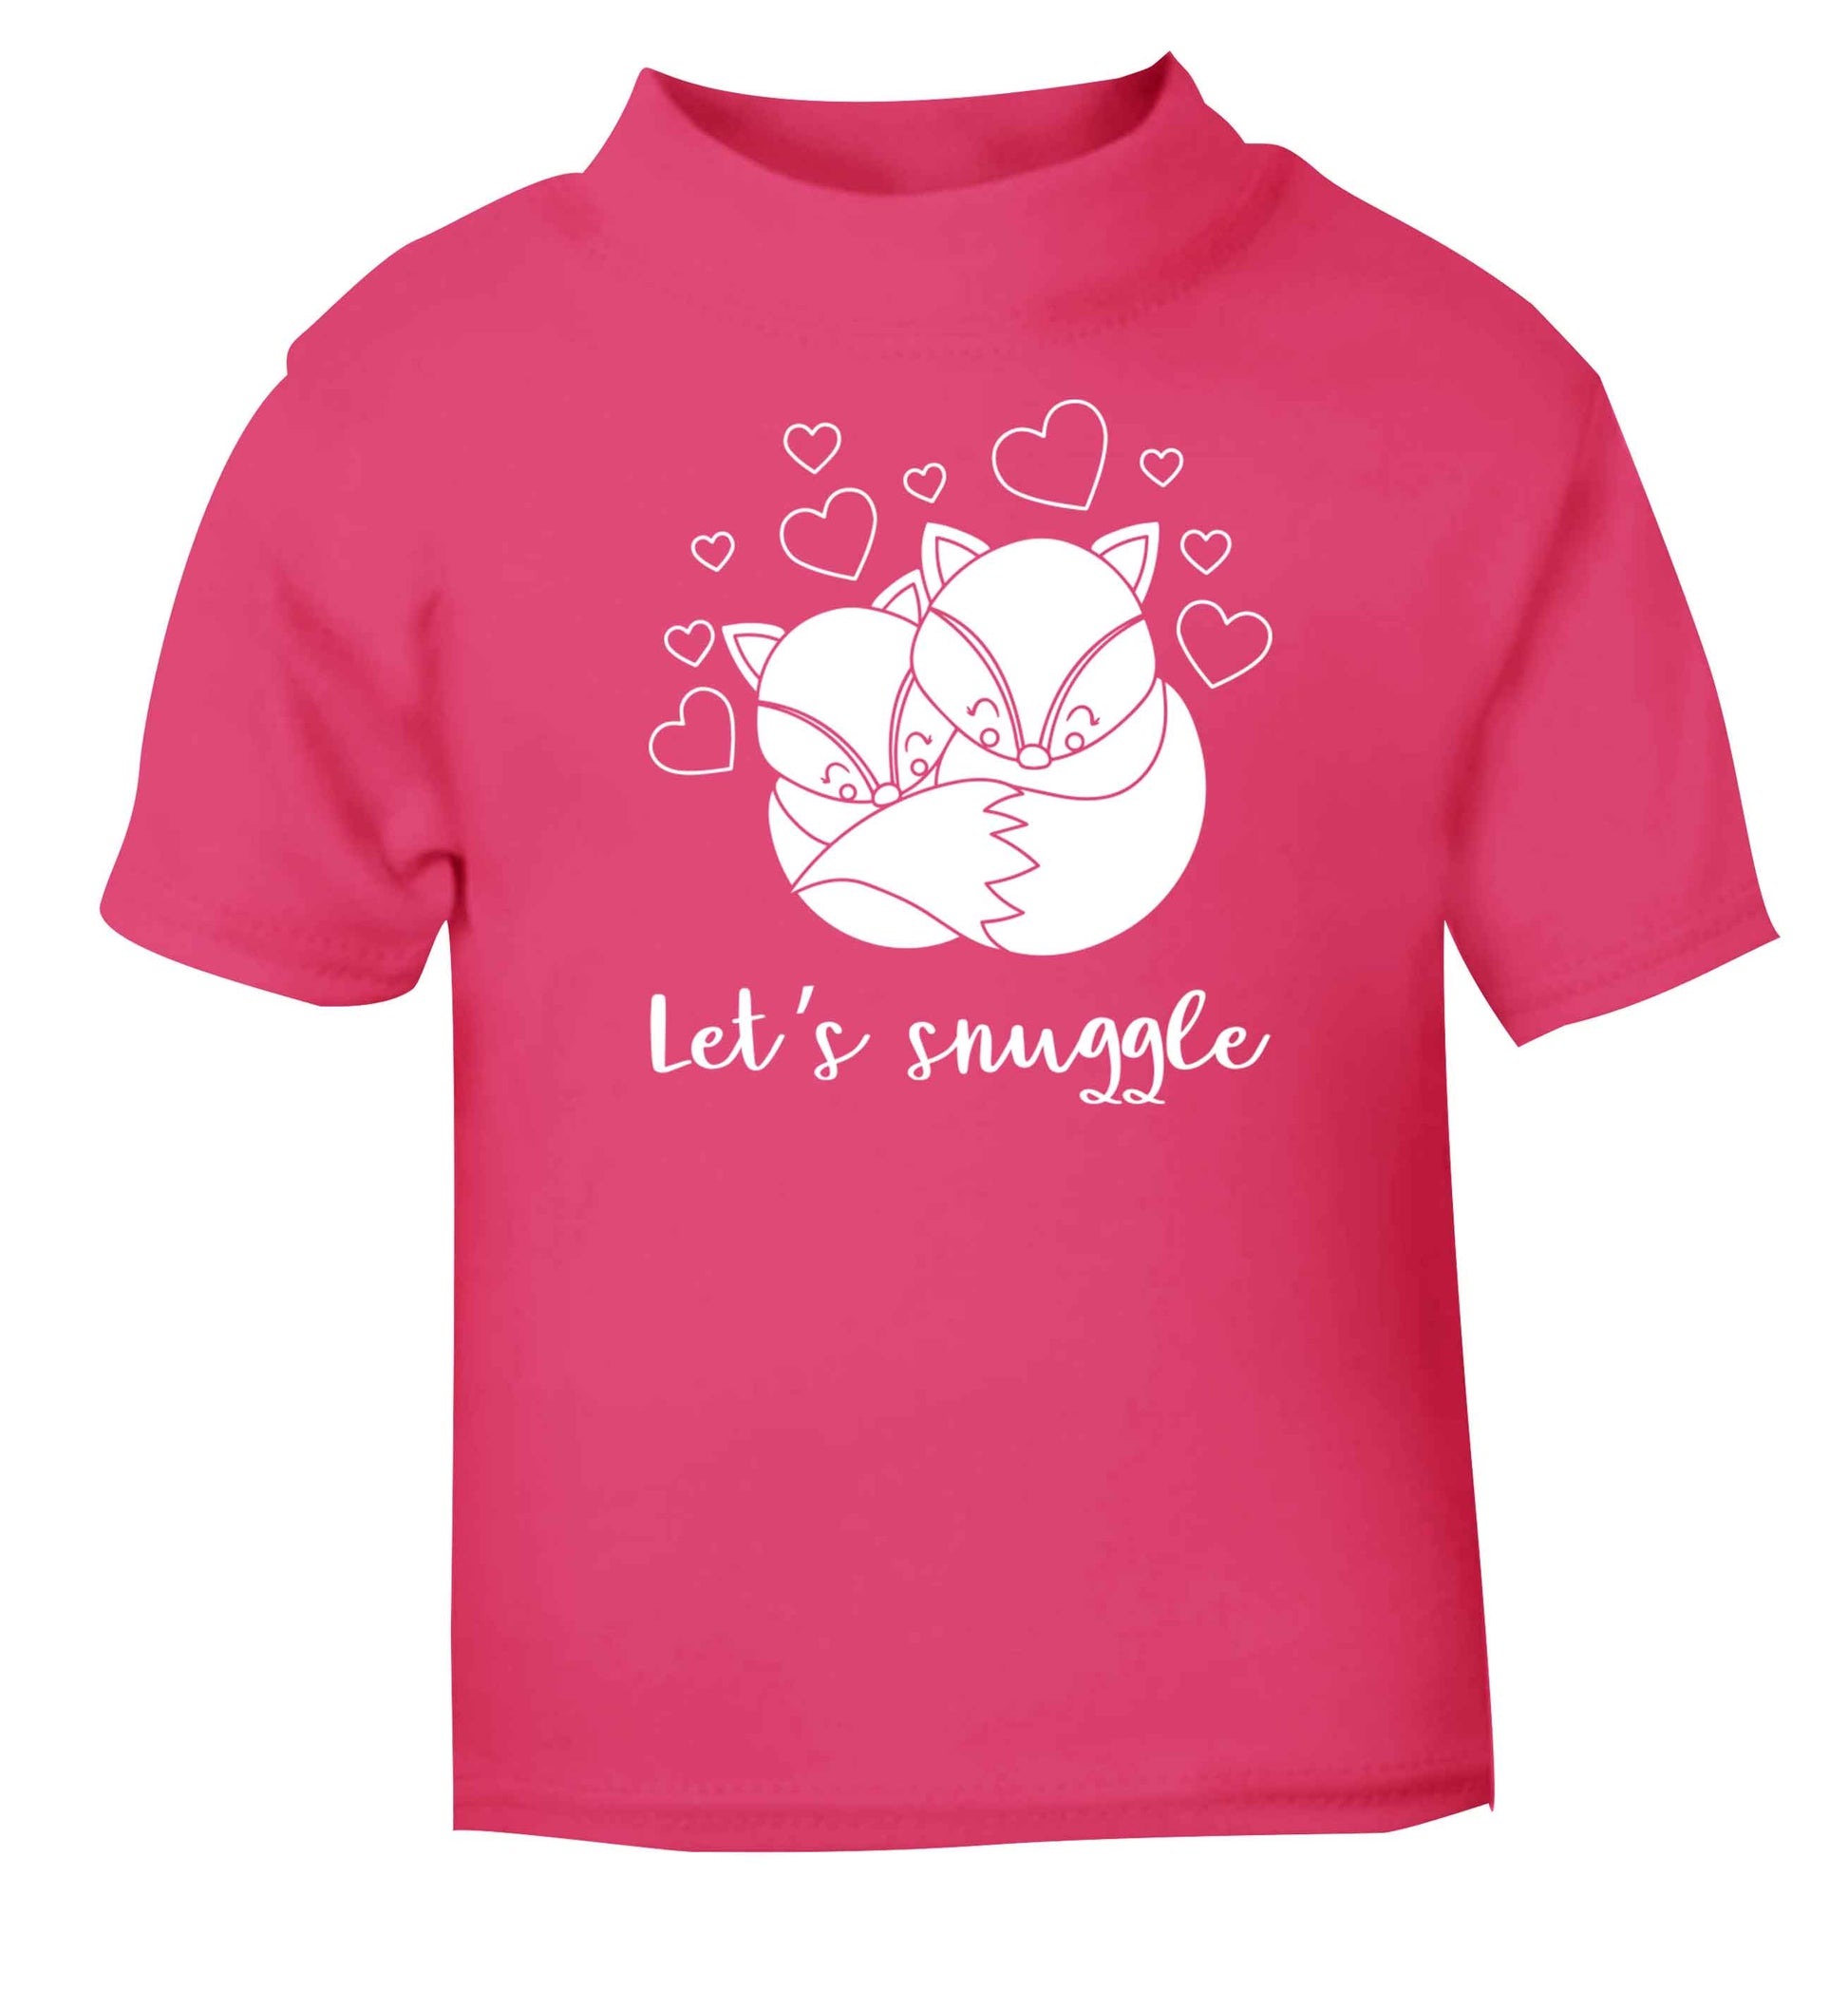 Let's snuggle pink baby toddler Tshirt 2 Years